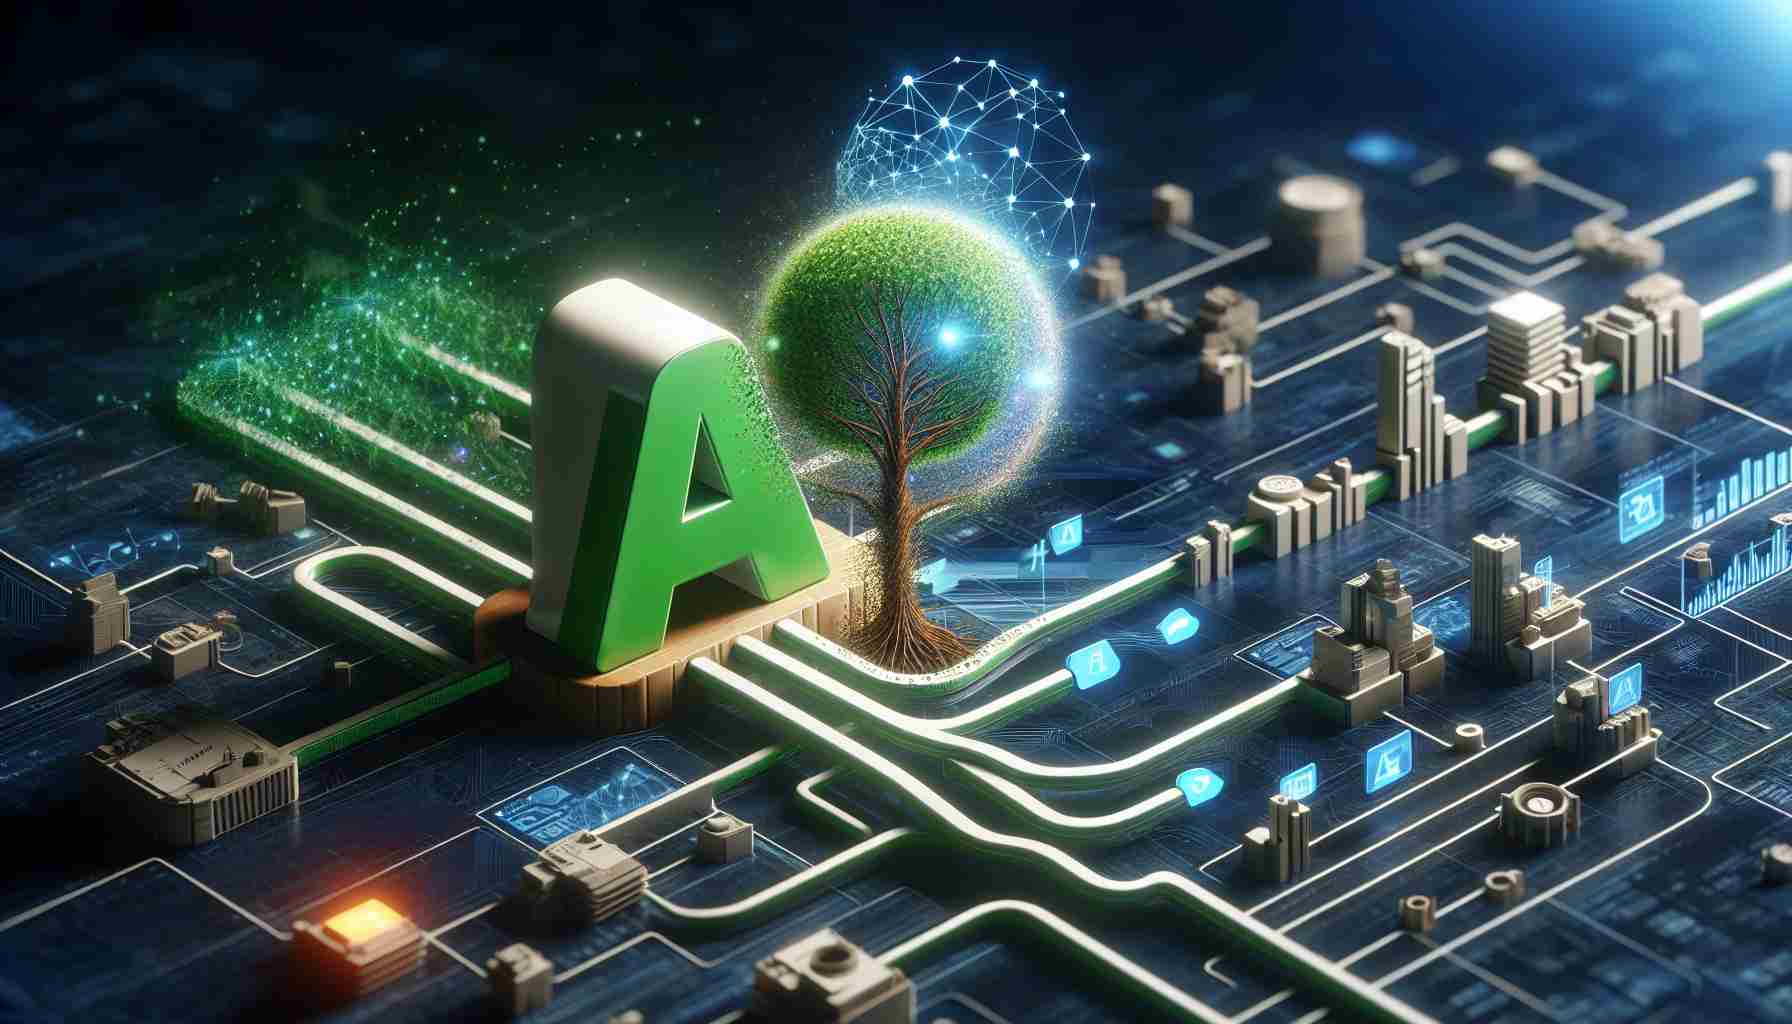 Nvidia Expands Its AI Footprint with Acquisition of Israeli Firm Run:ai